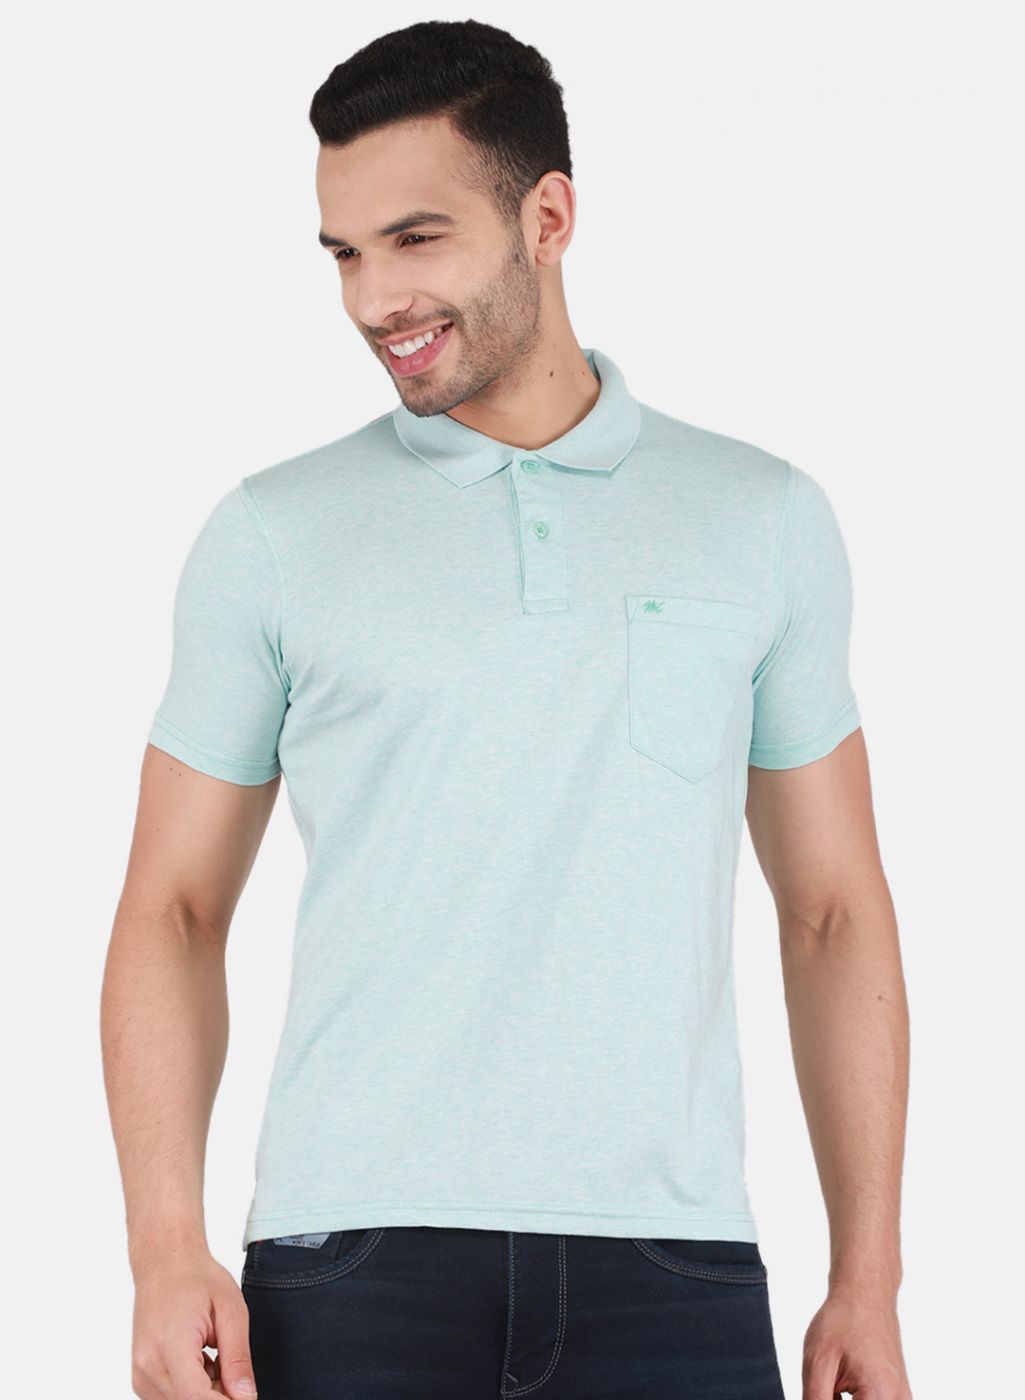 Polo T Shirts Men - Buy Polo T Shirts Men online at Best Prices in India